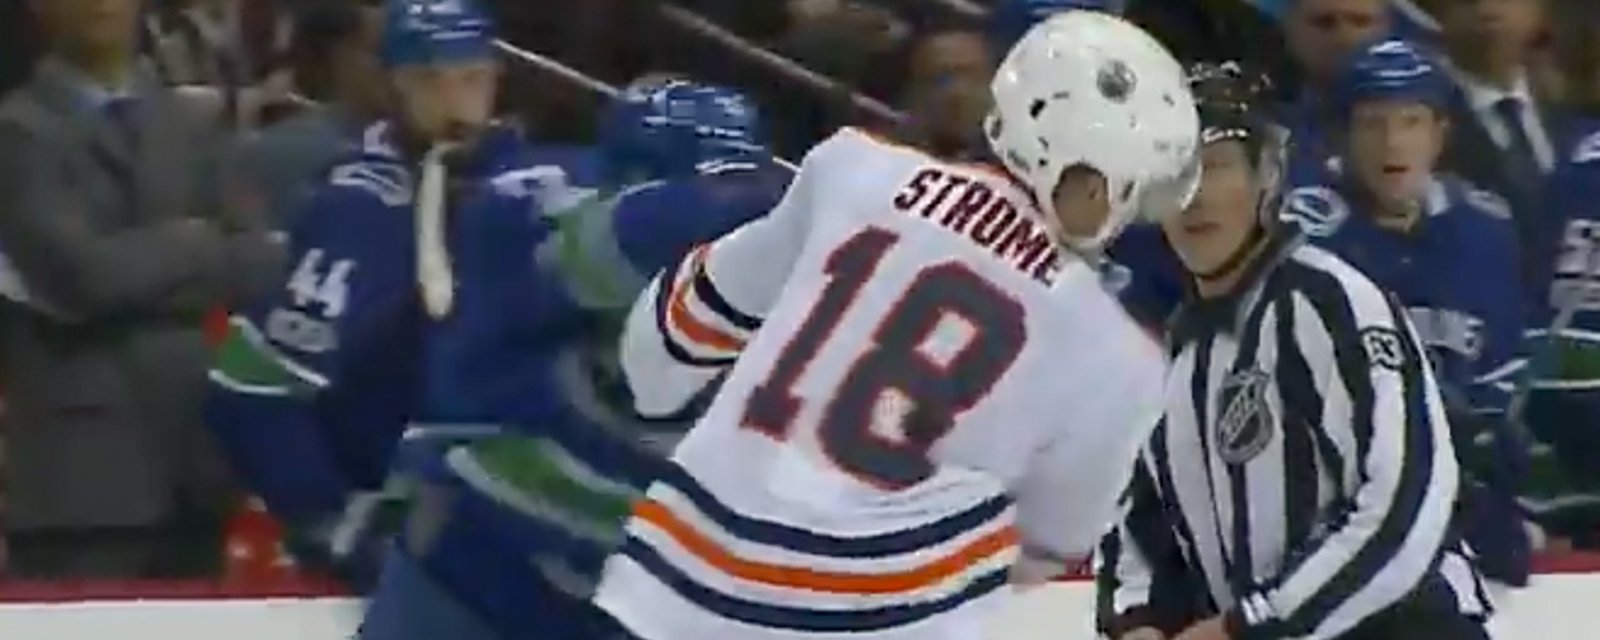 Must See: Stecher and Strome throw down on Saturday night!